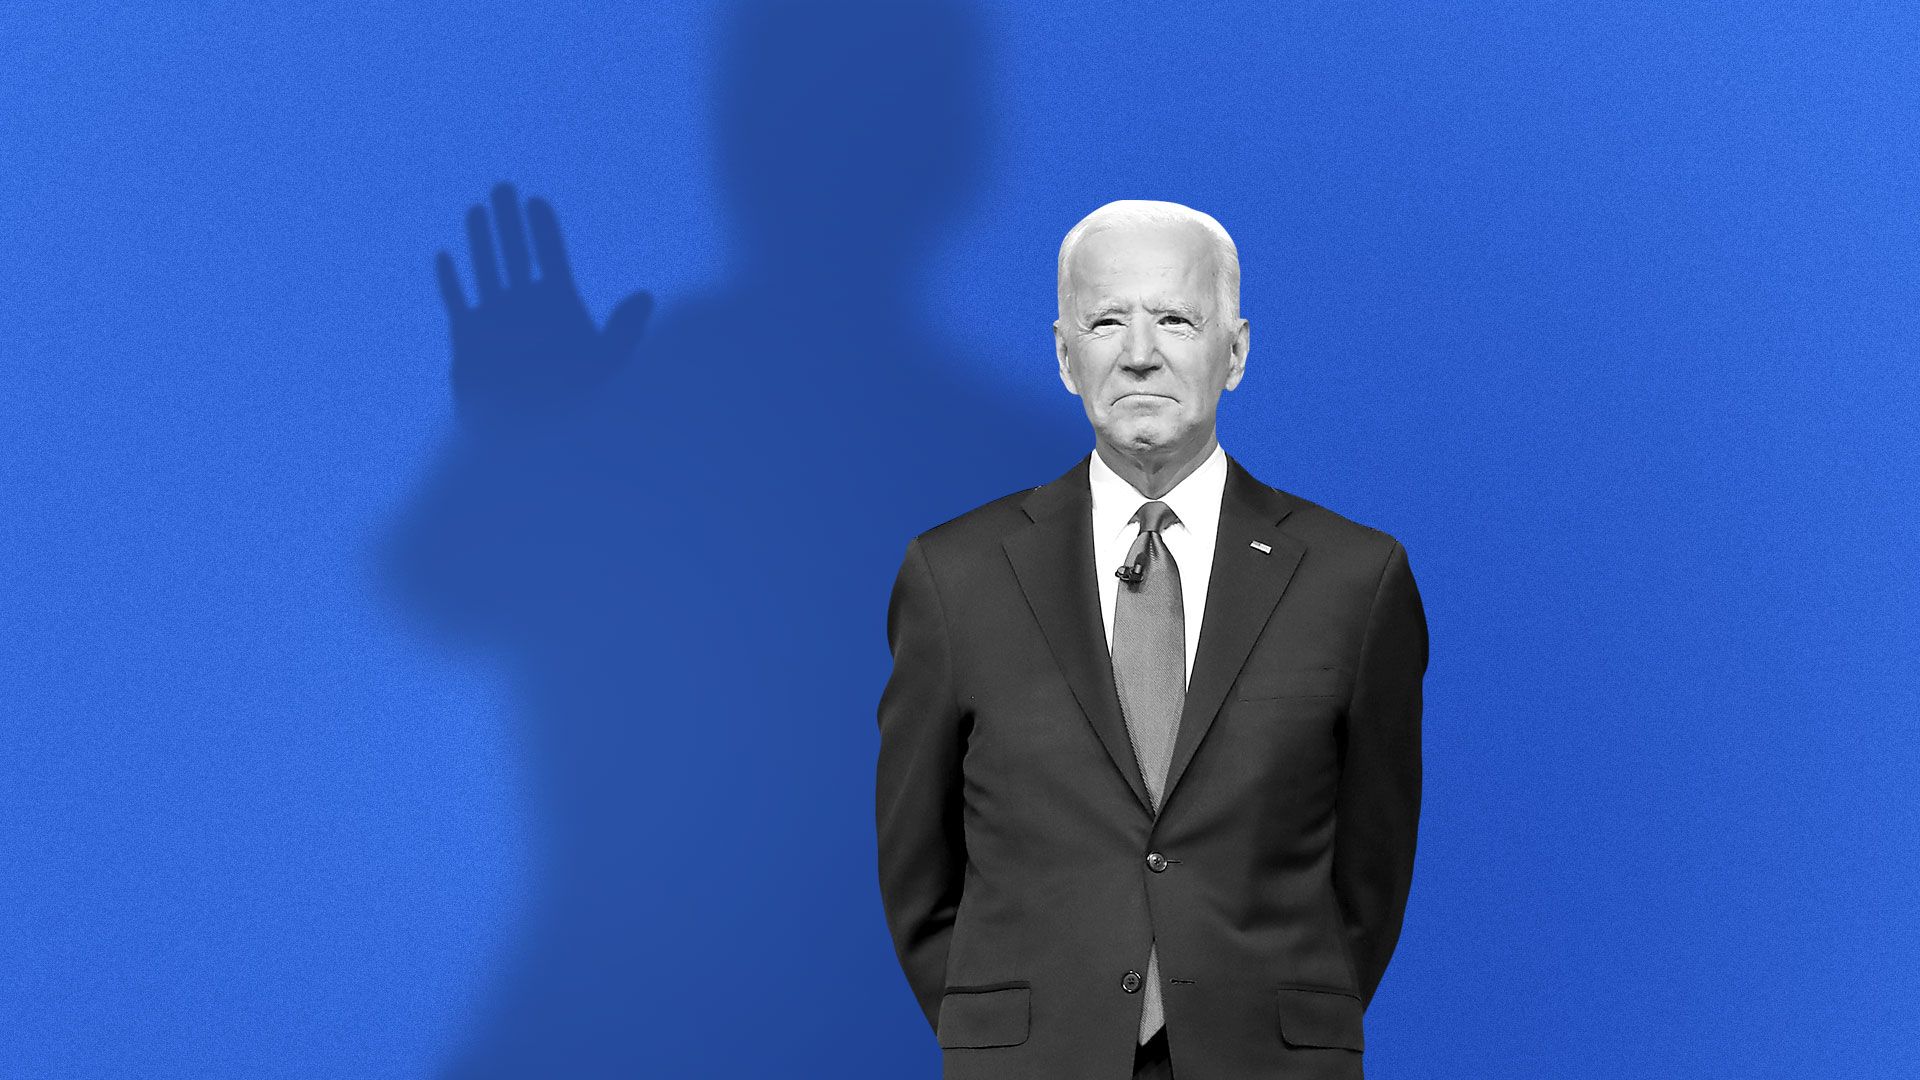 Illustration of Joe Biden with a shadow behind him reaching its hand out